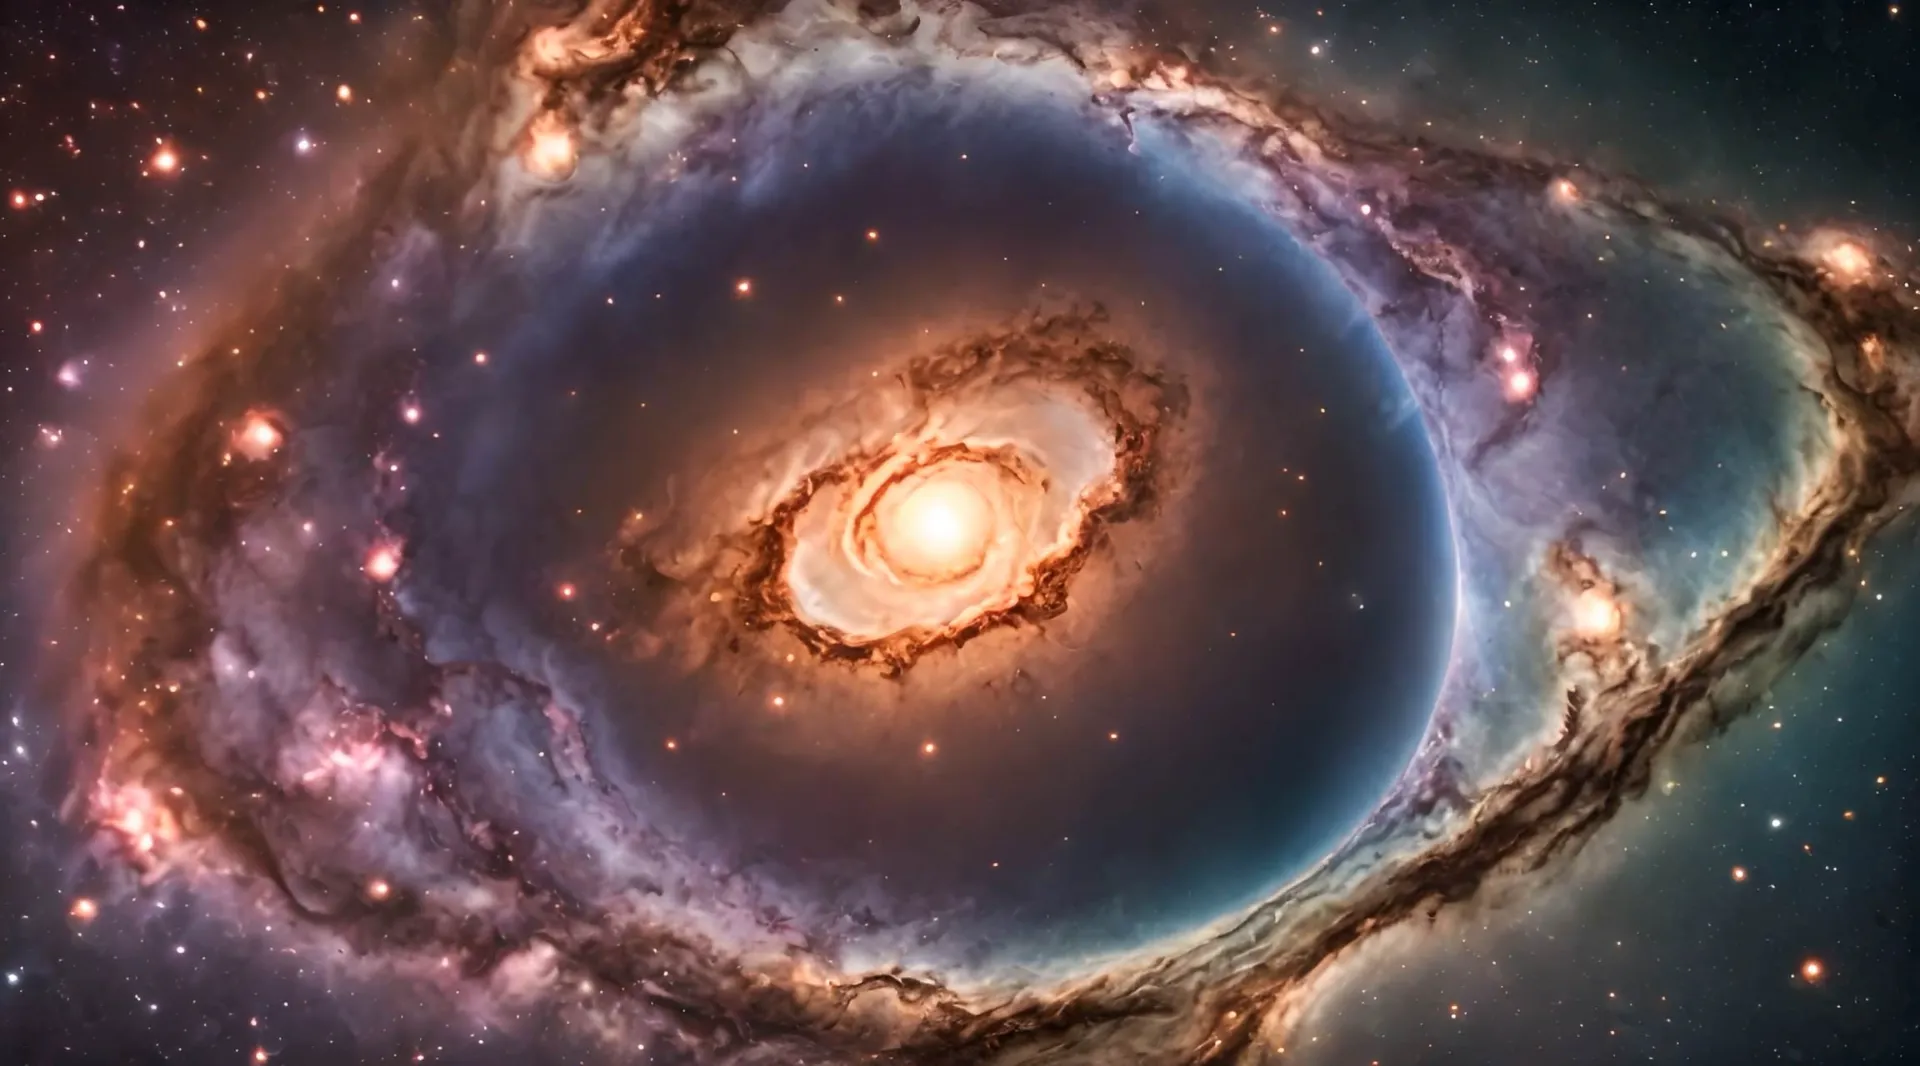 Stunning Galaxy Core and Spiral Arms Scene Backdrop Video